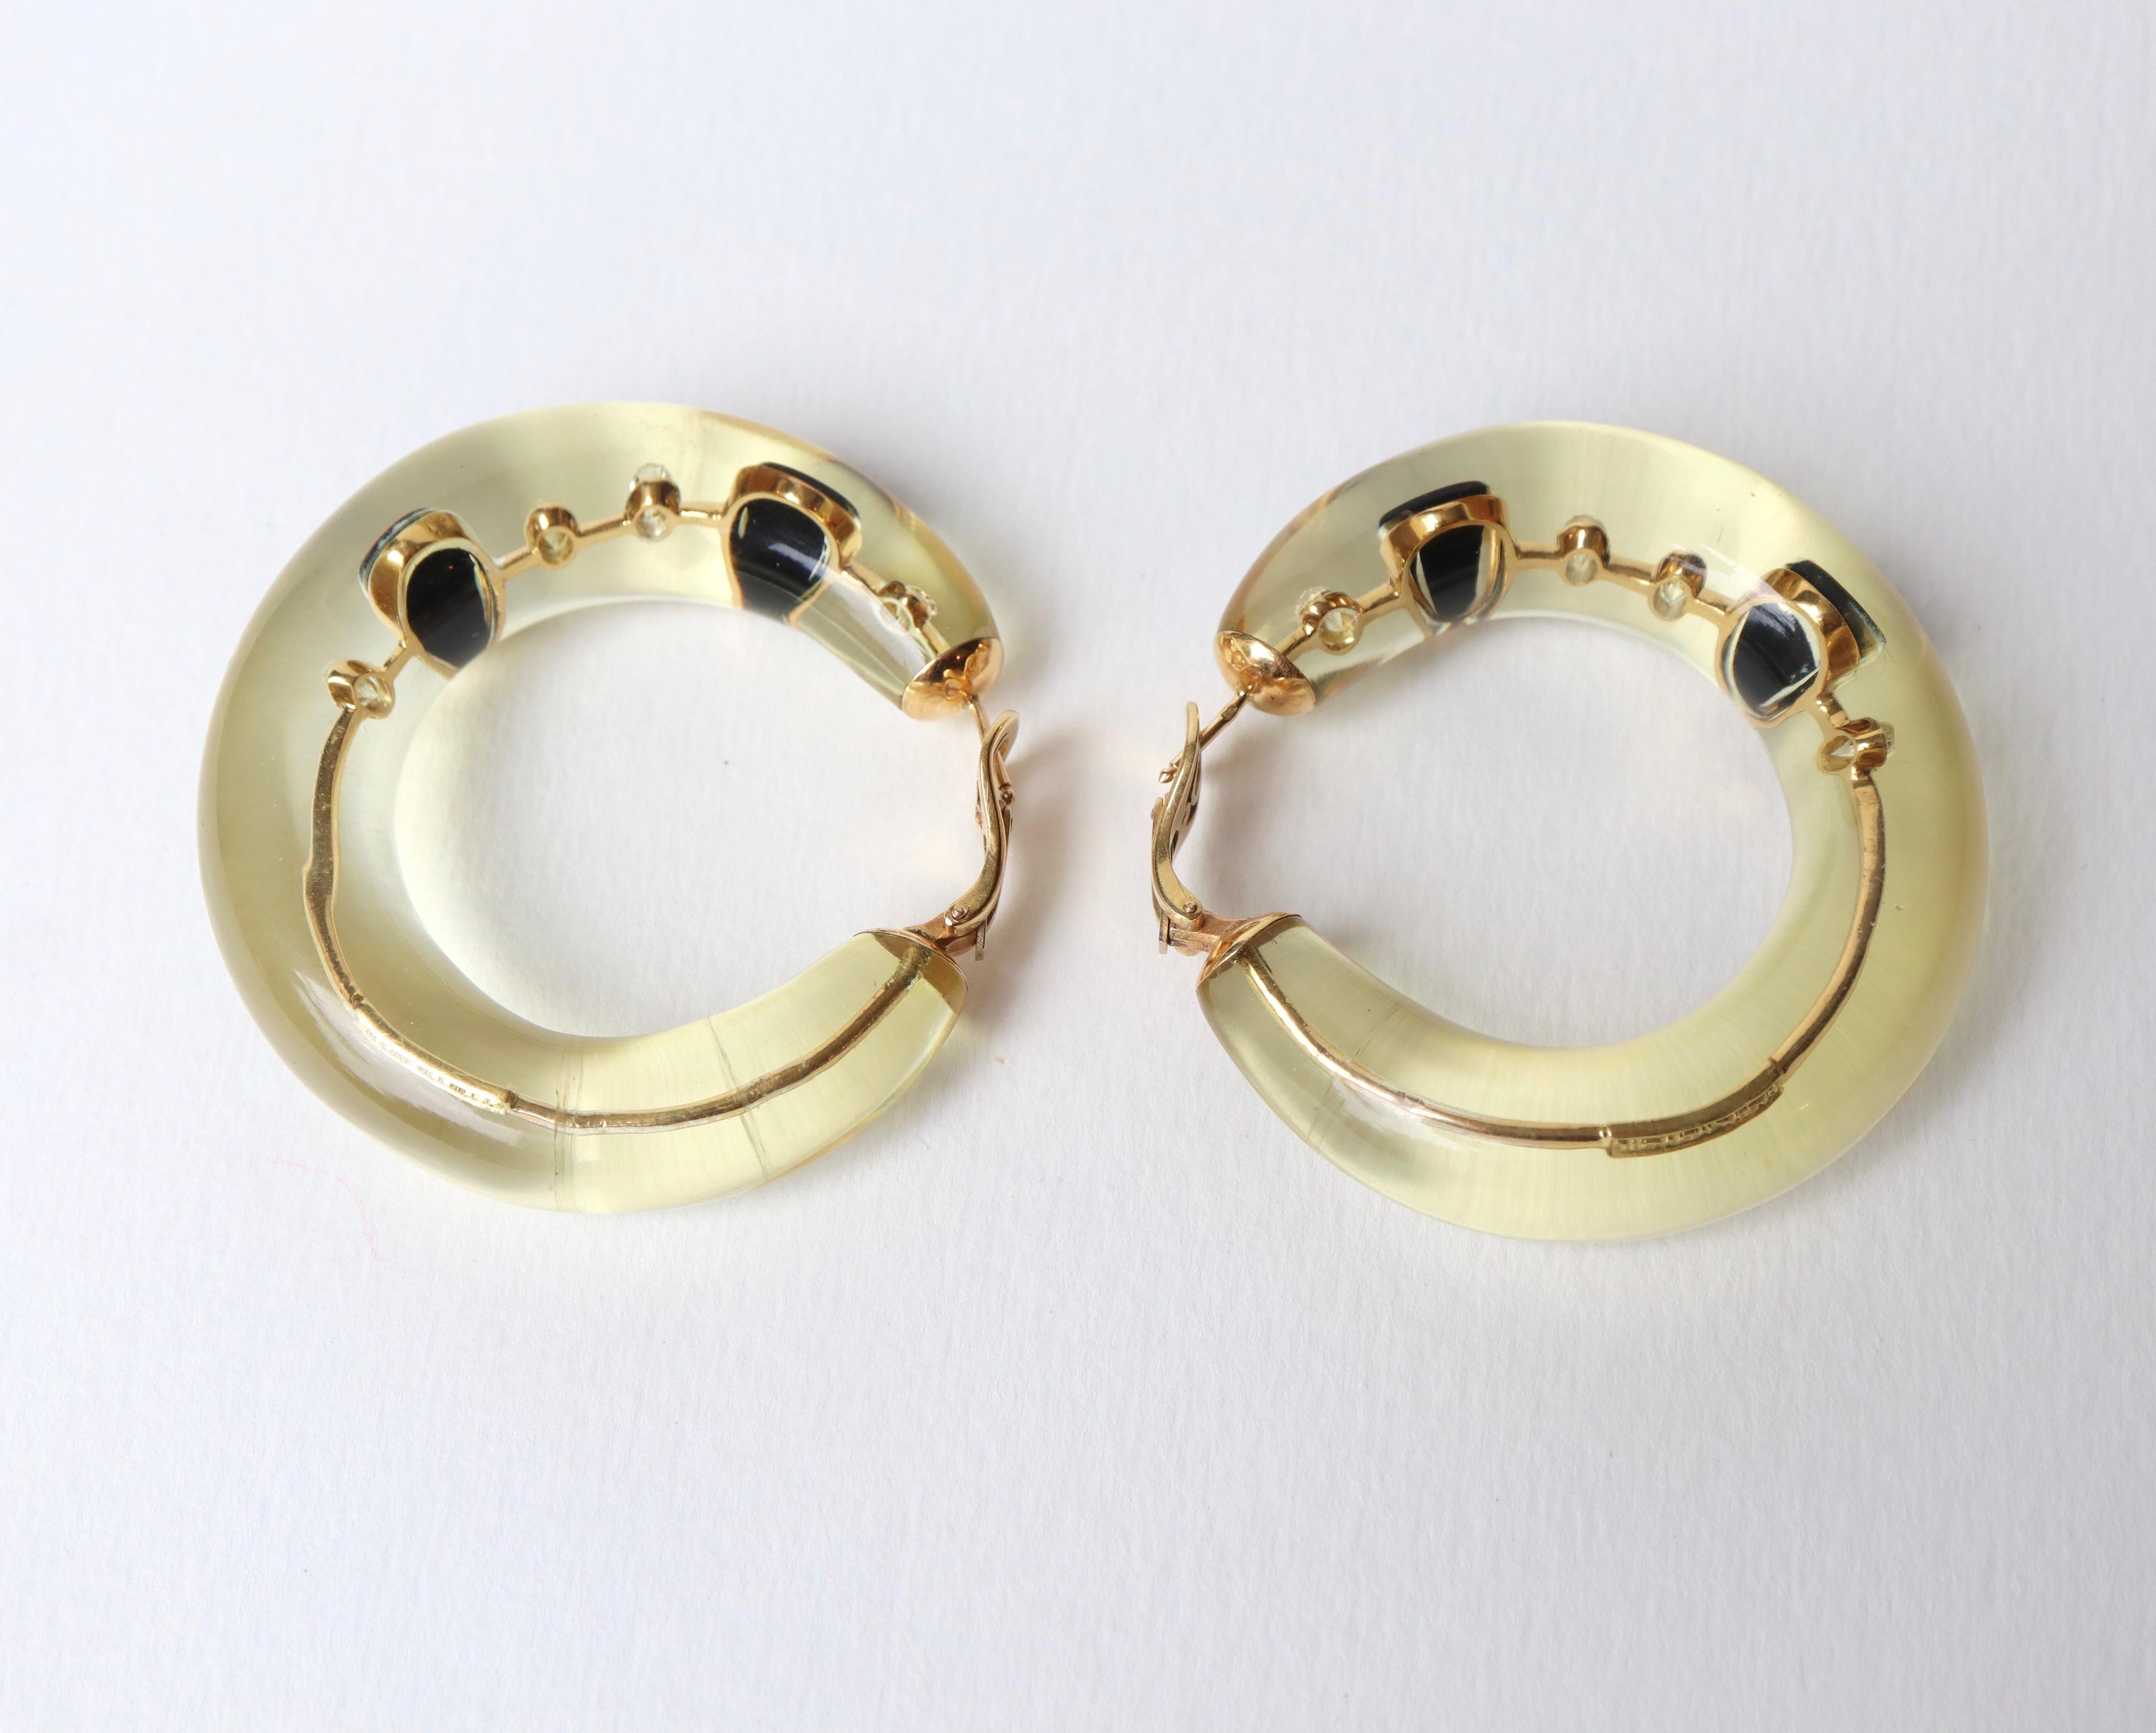 Pascal Morabito Hoop Earrings, 18 Karat Yellow Gold, Diamonds and Onyx in Resin In Good Condition For Sale In Paris, FR